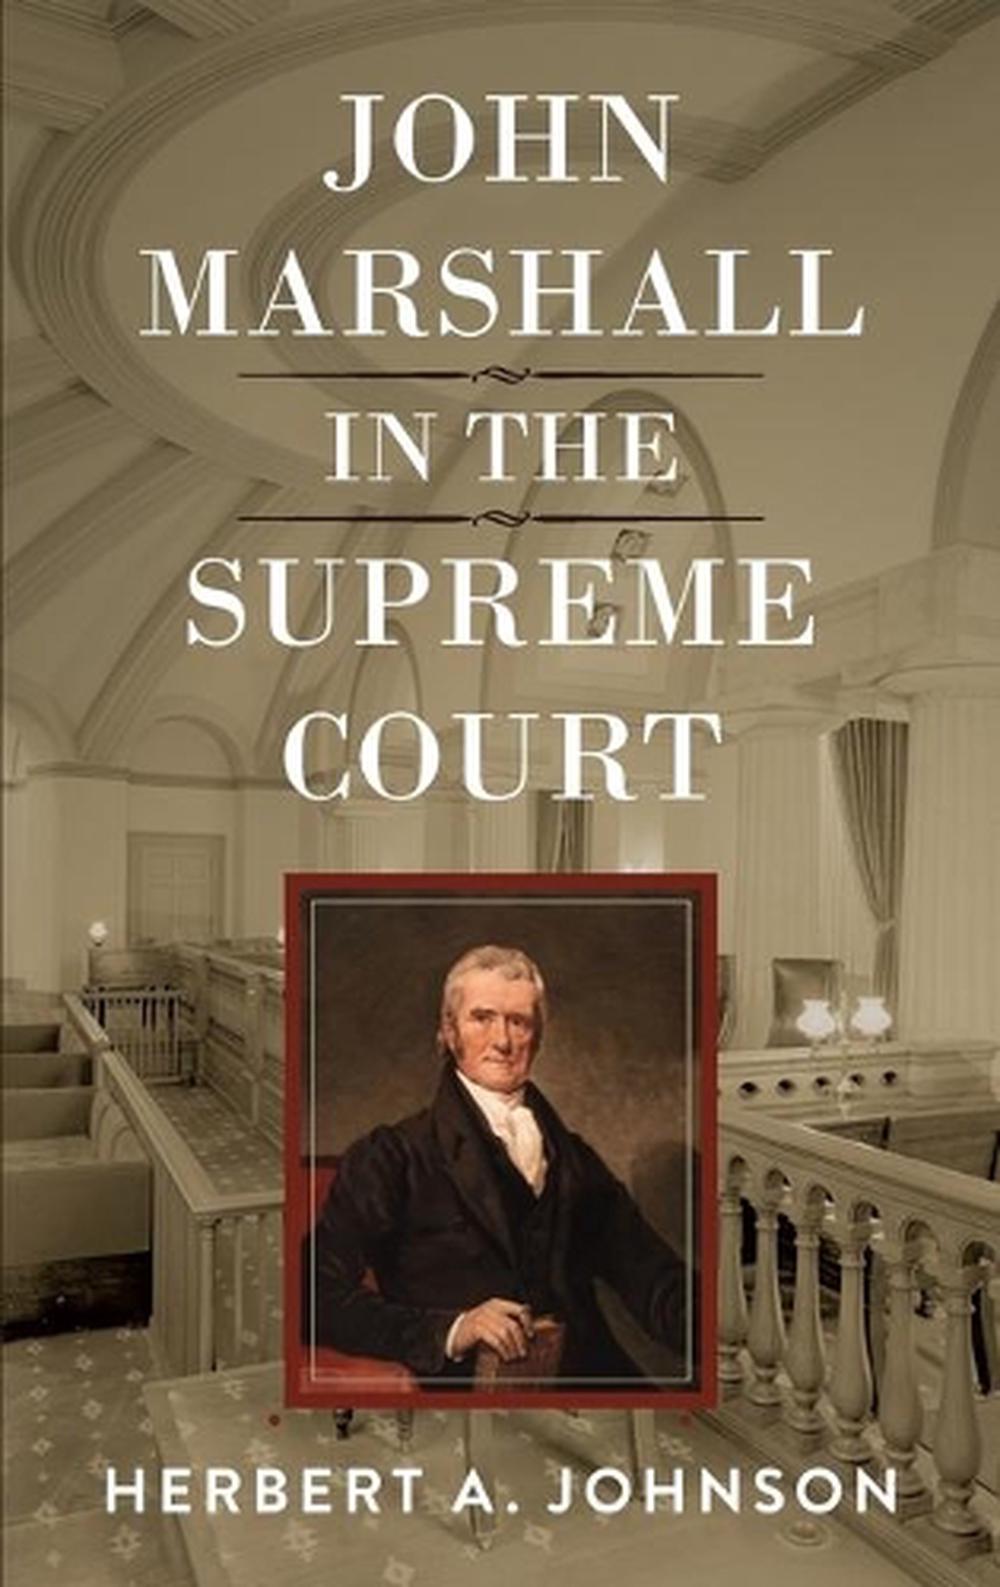 John Marshall in the Supreme Court by Herbert A Johnson Hardcover Book